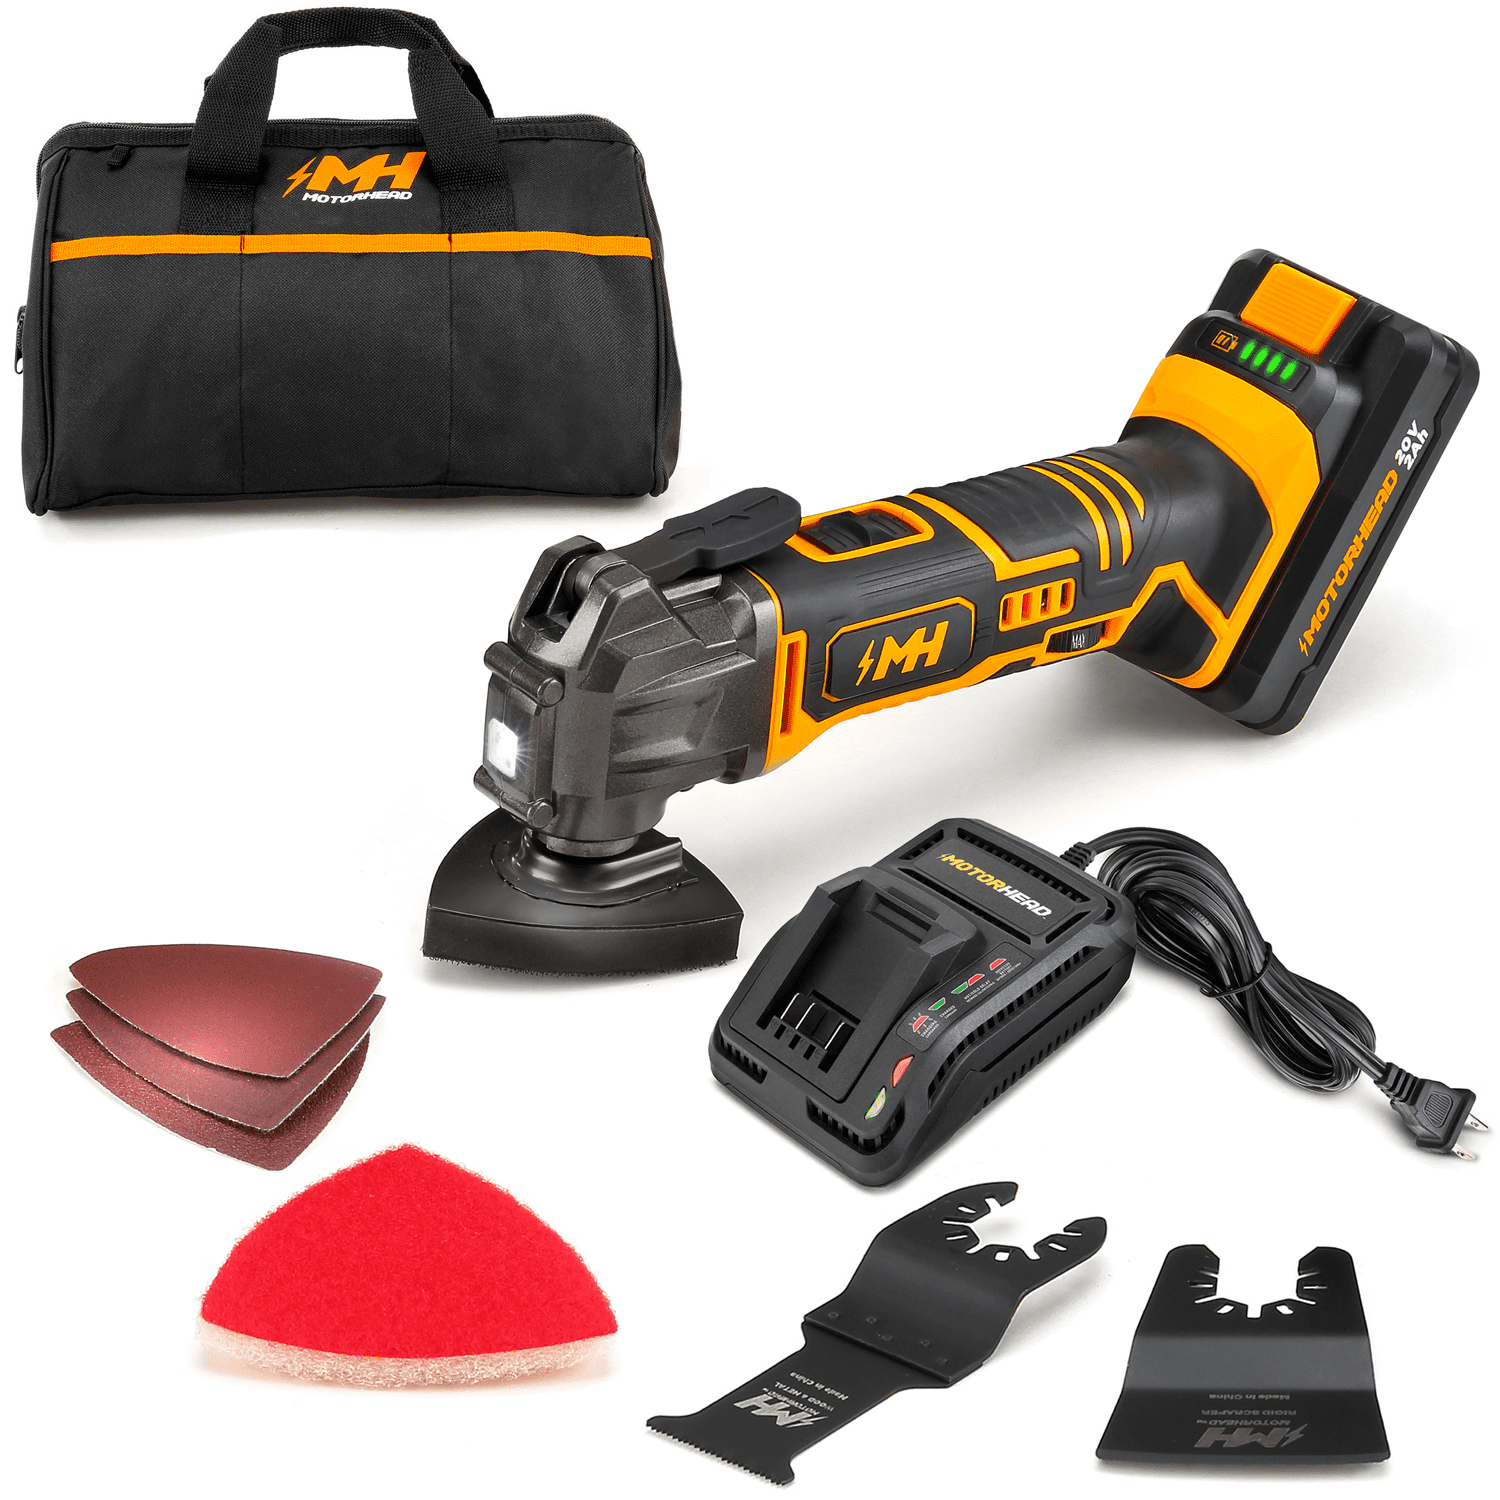 MAXIMUM 20V Max Cordless Variable Speed Oscillating Multi-Tool with Carry  Bag, Tool Only